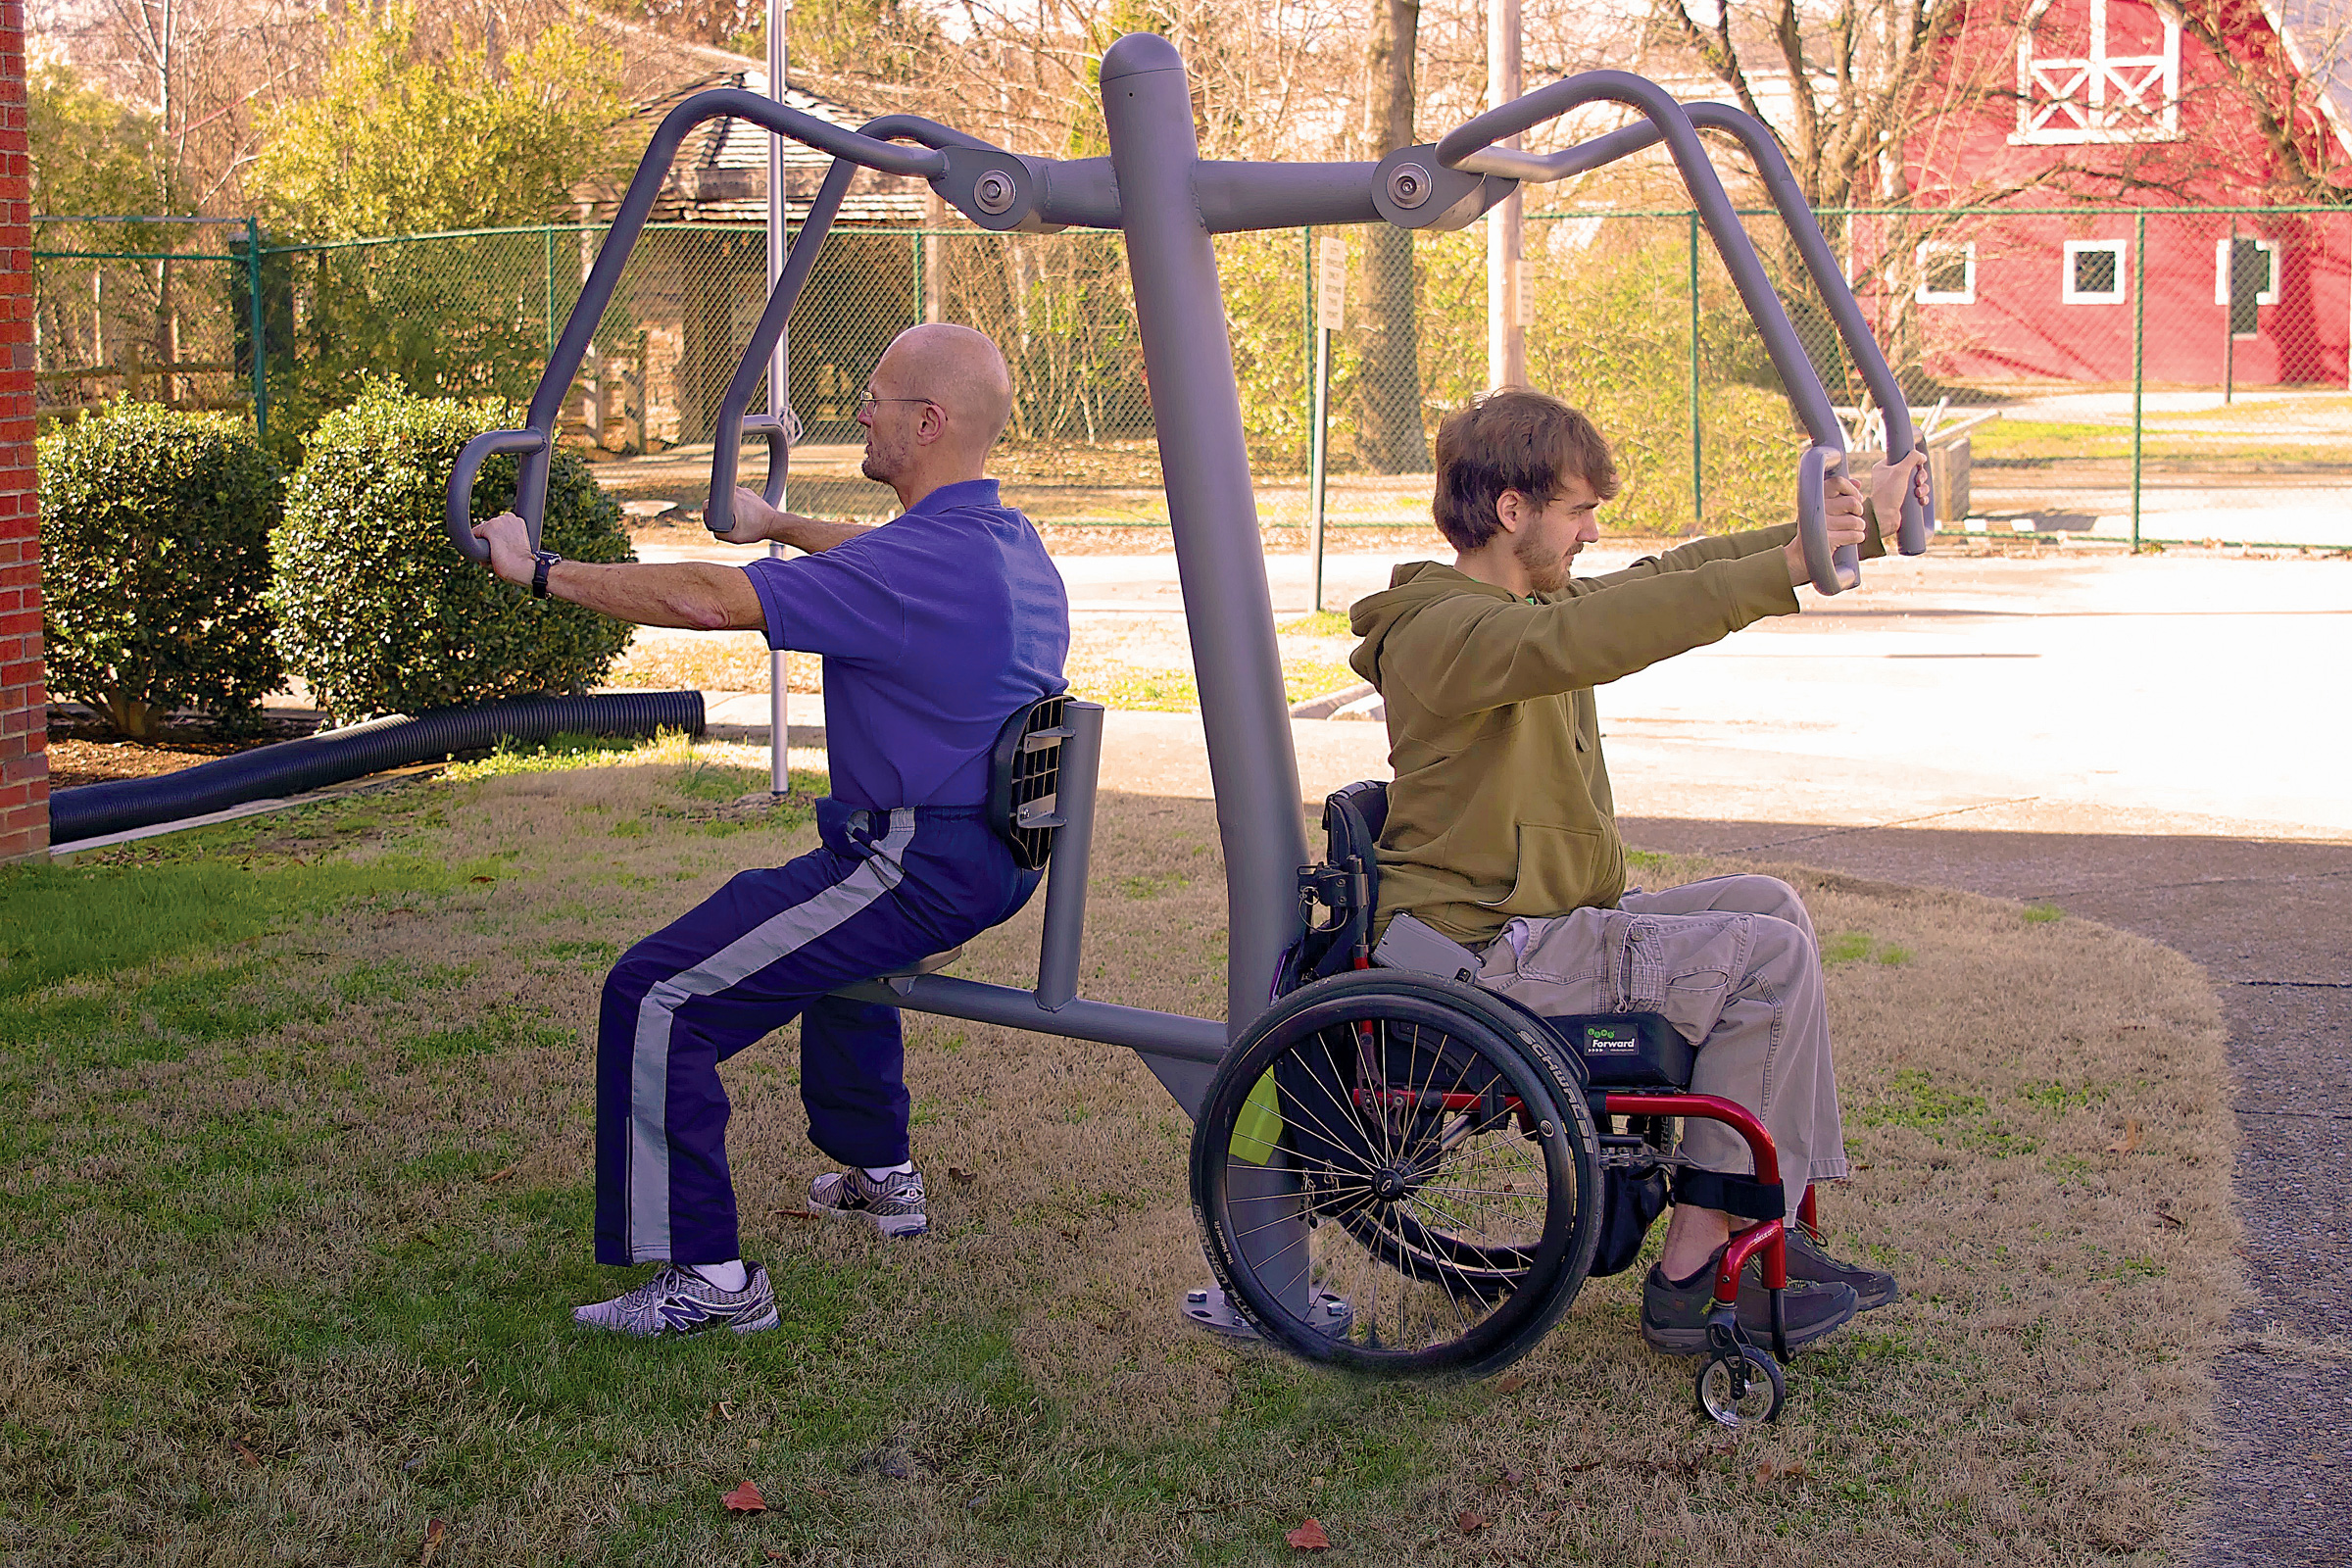 Accessible products like the GTfit Chest Press create outdoor fitness opportunities for adults of all abilities and fitness levels.